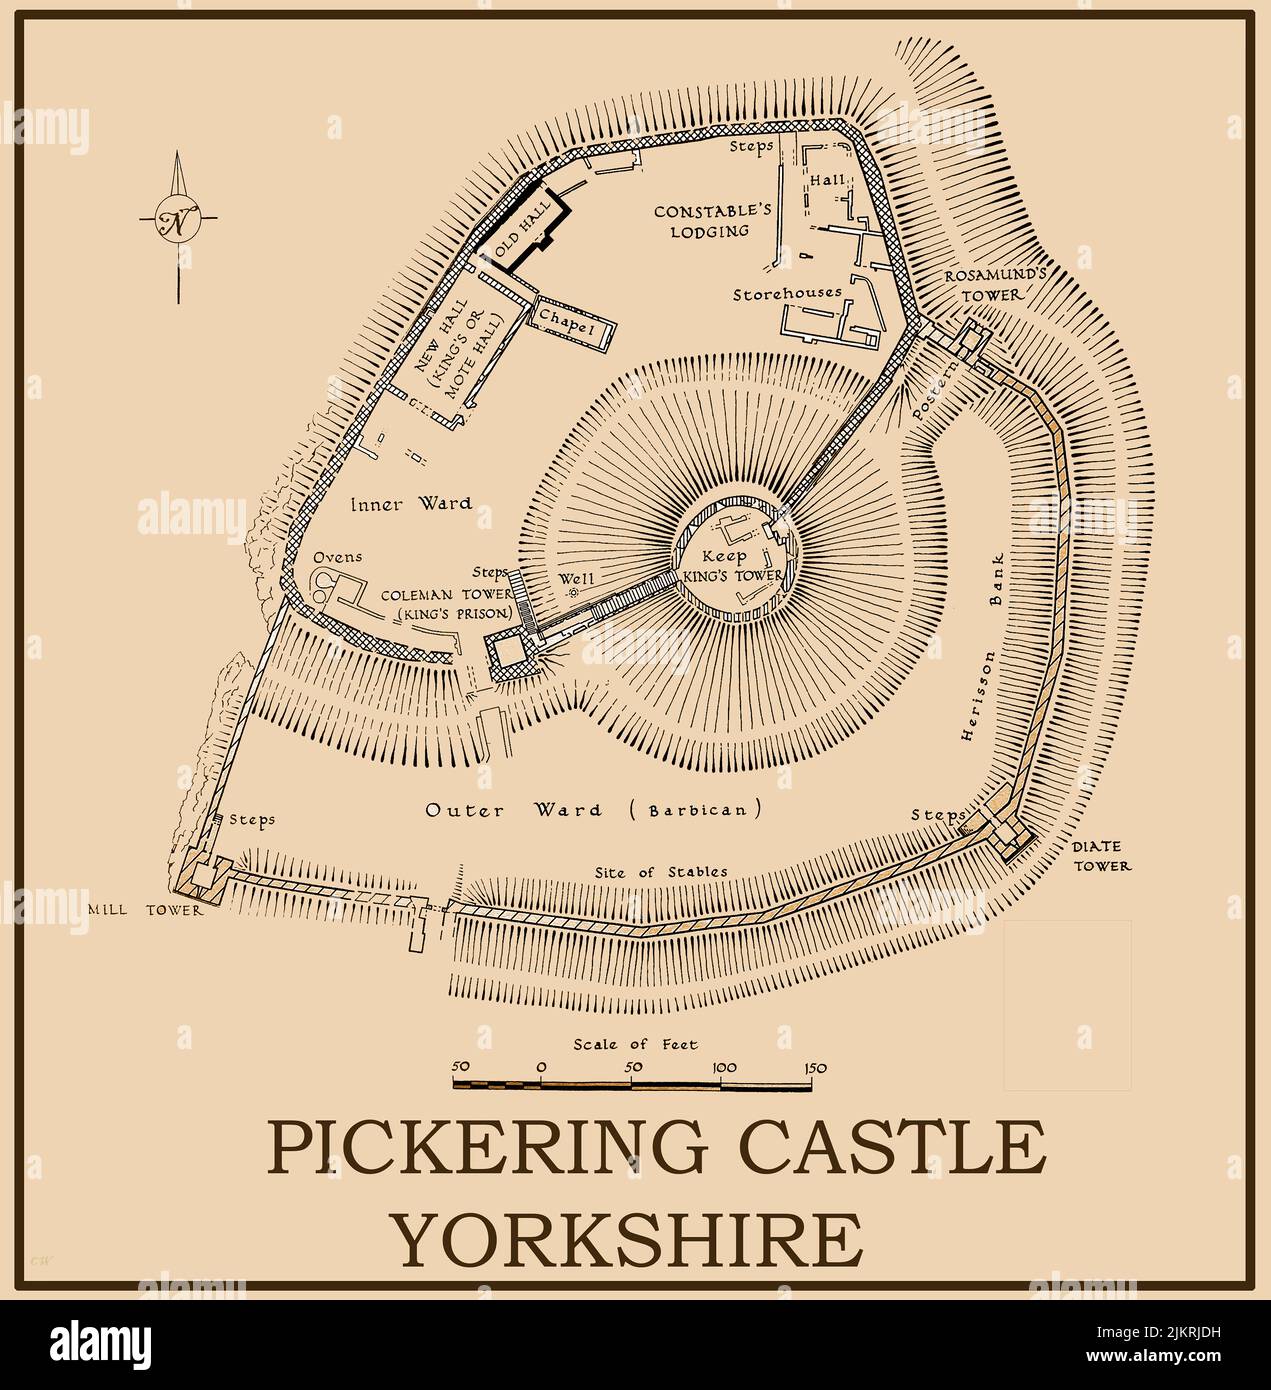 A vintage map or plan of Pickering Castle, Yorkshire, UK. The  motte-and-bailey fortification was preceded by a 12th century timber and earth motte built by the Normans under William the Conqueror  . The stone fortifications date from the 13th century. It was constructed to maintain control of the area after the Harrying of the North. Stock Photo